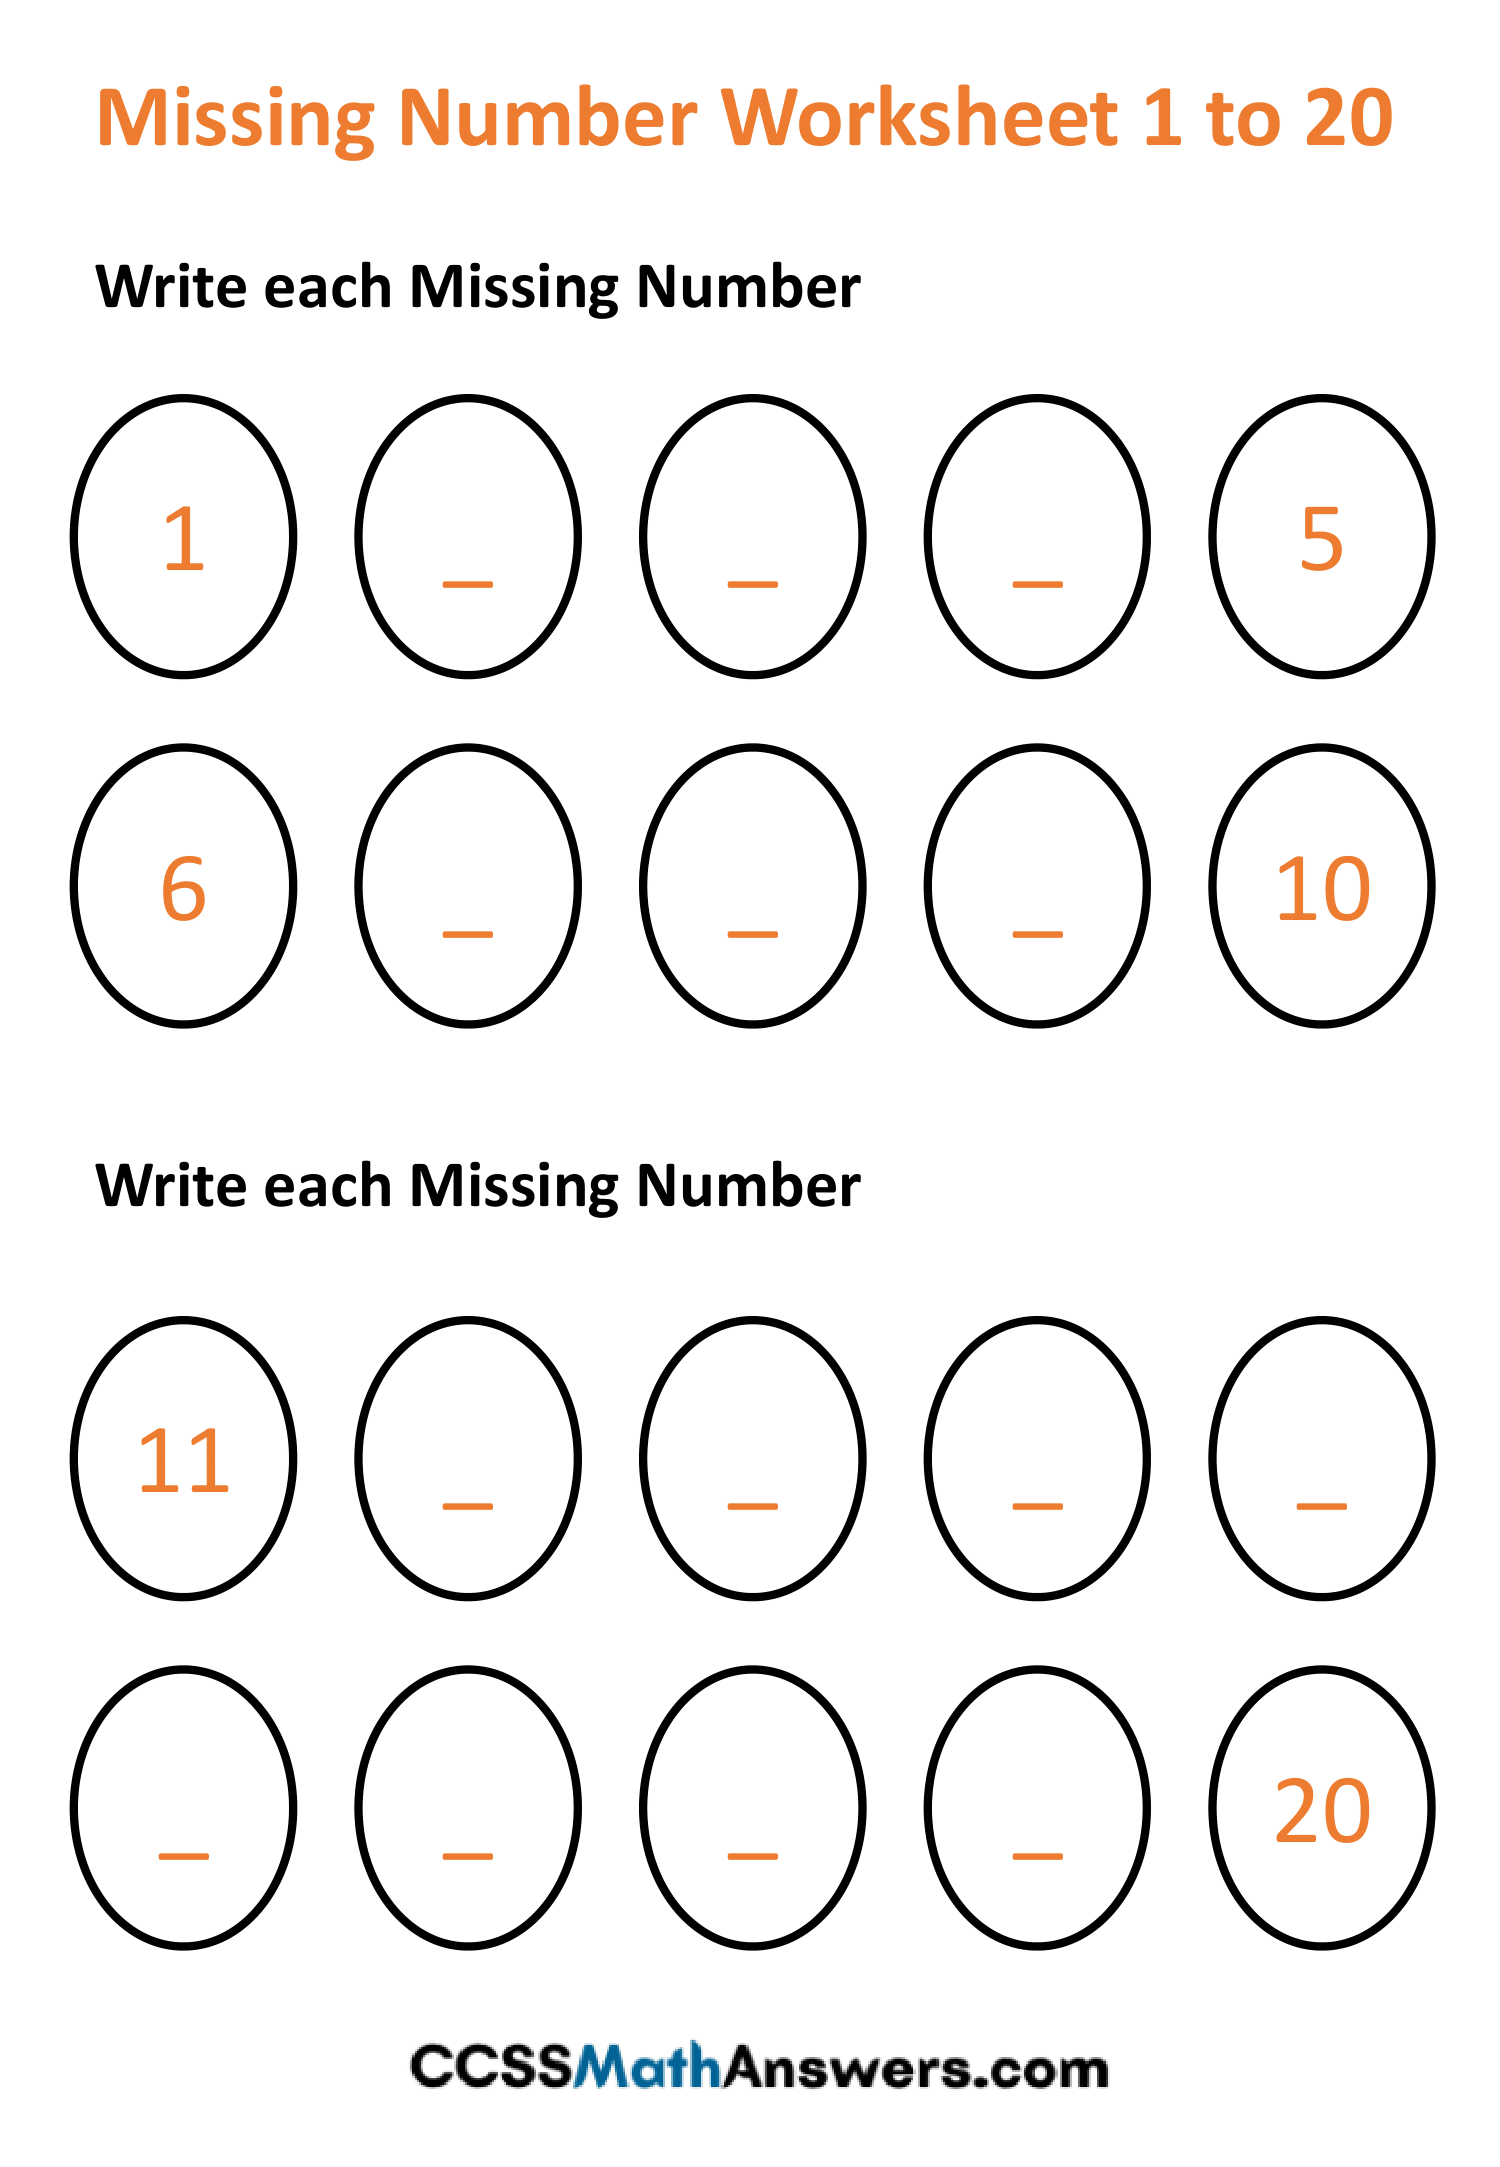 Fill in the Missing Number Worksheet 1 to 20